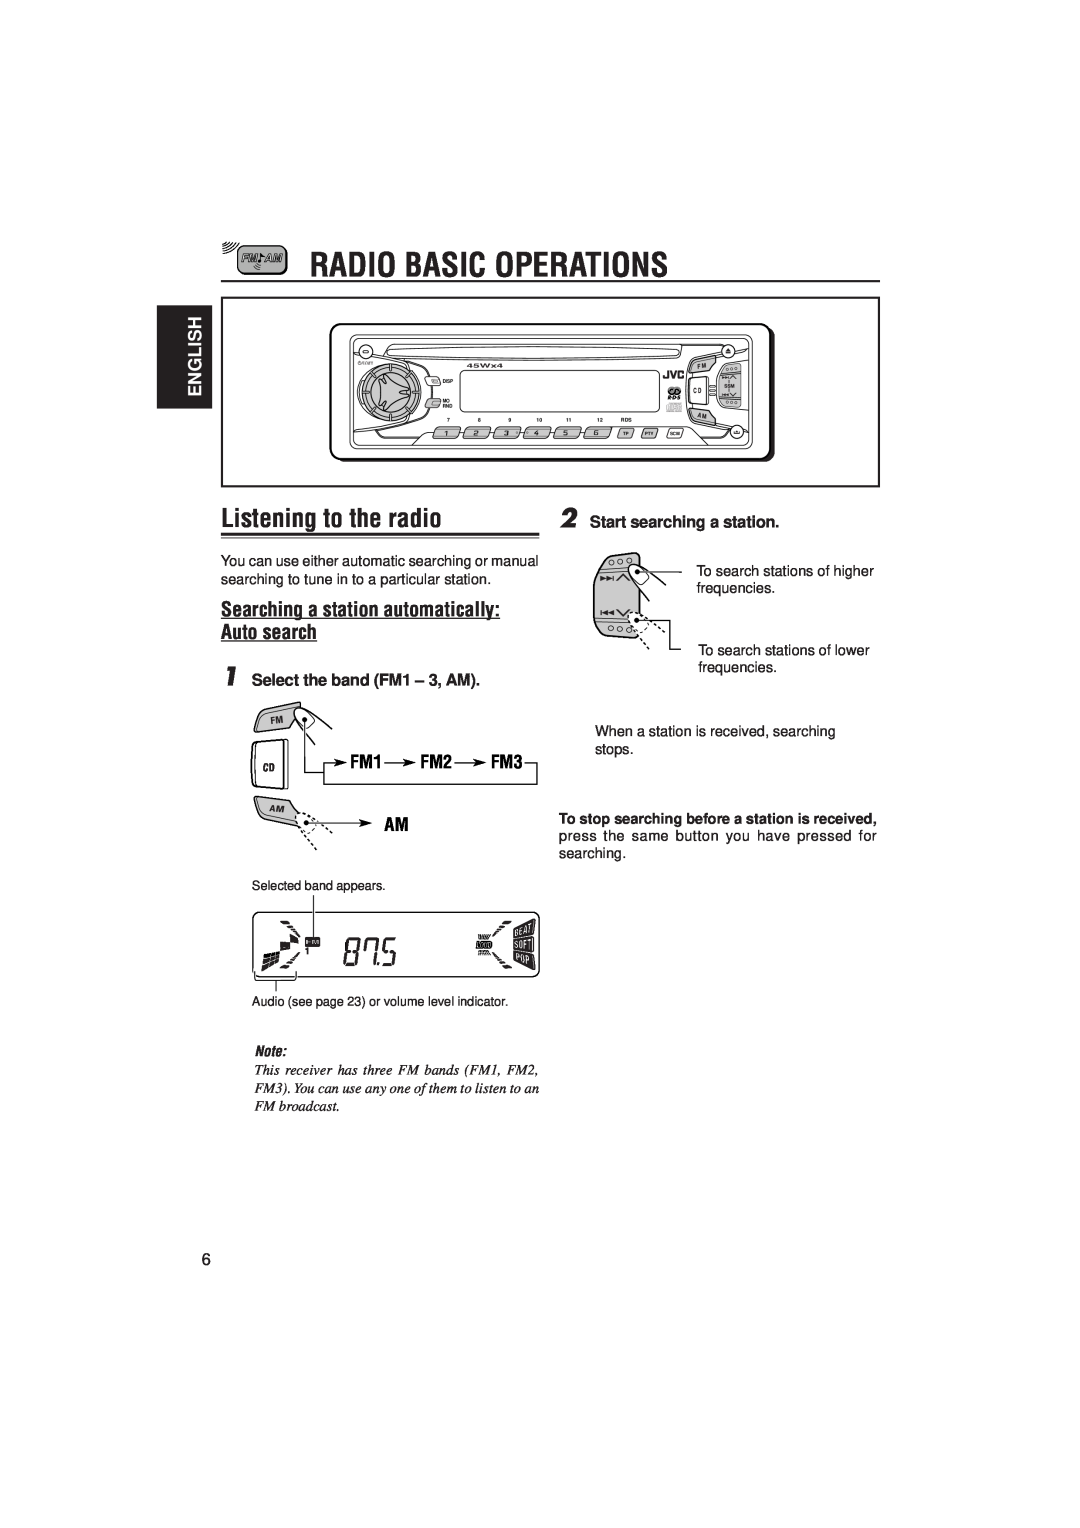 JVC KD-S733R Radio Basic Operations, Listening to the radio, Searching a station automatically Auto search, FM1 FM2 FM3 AM 